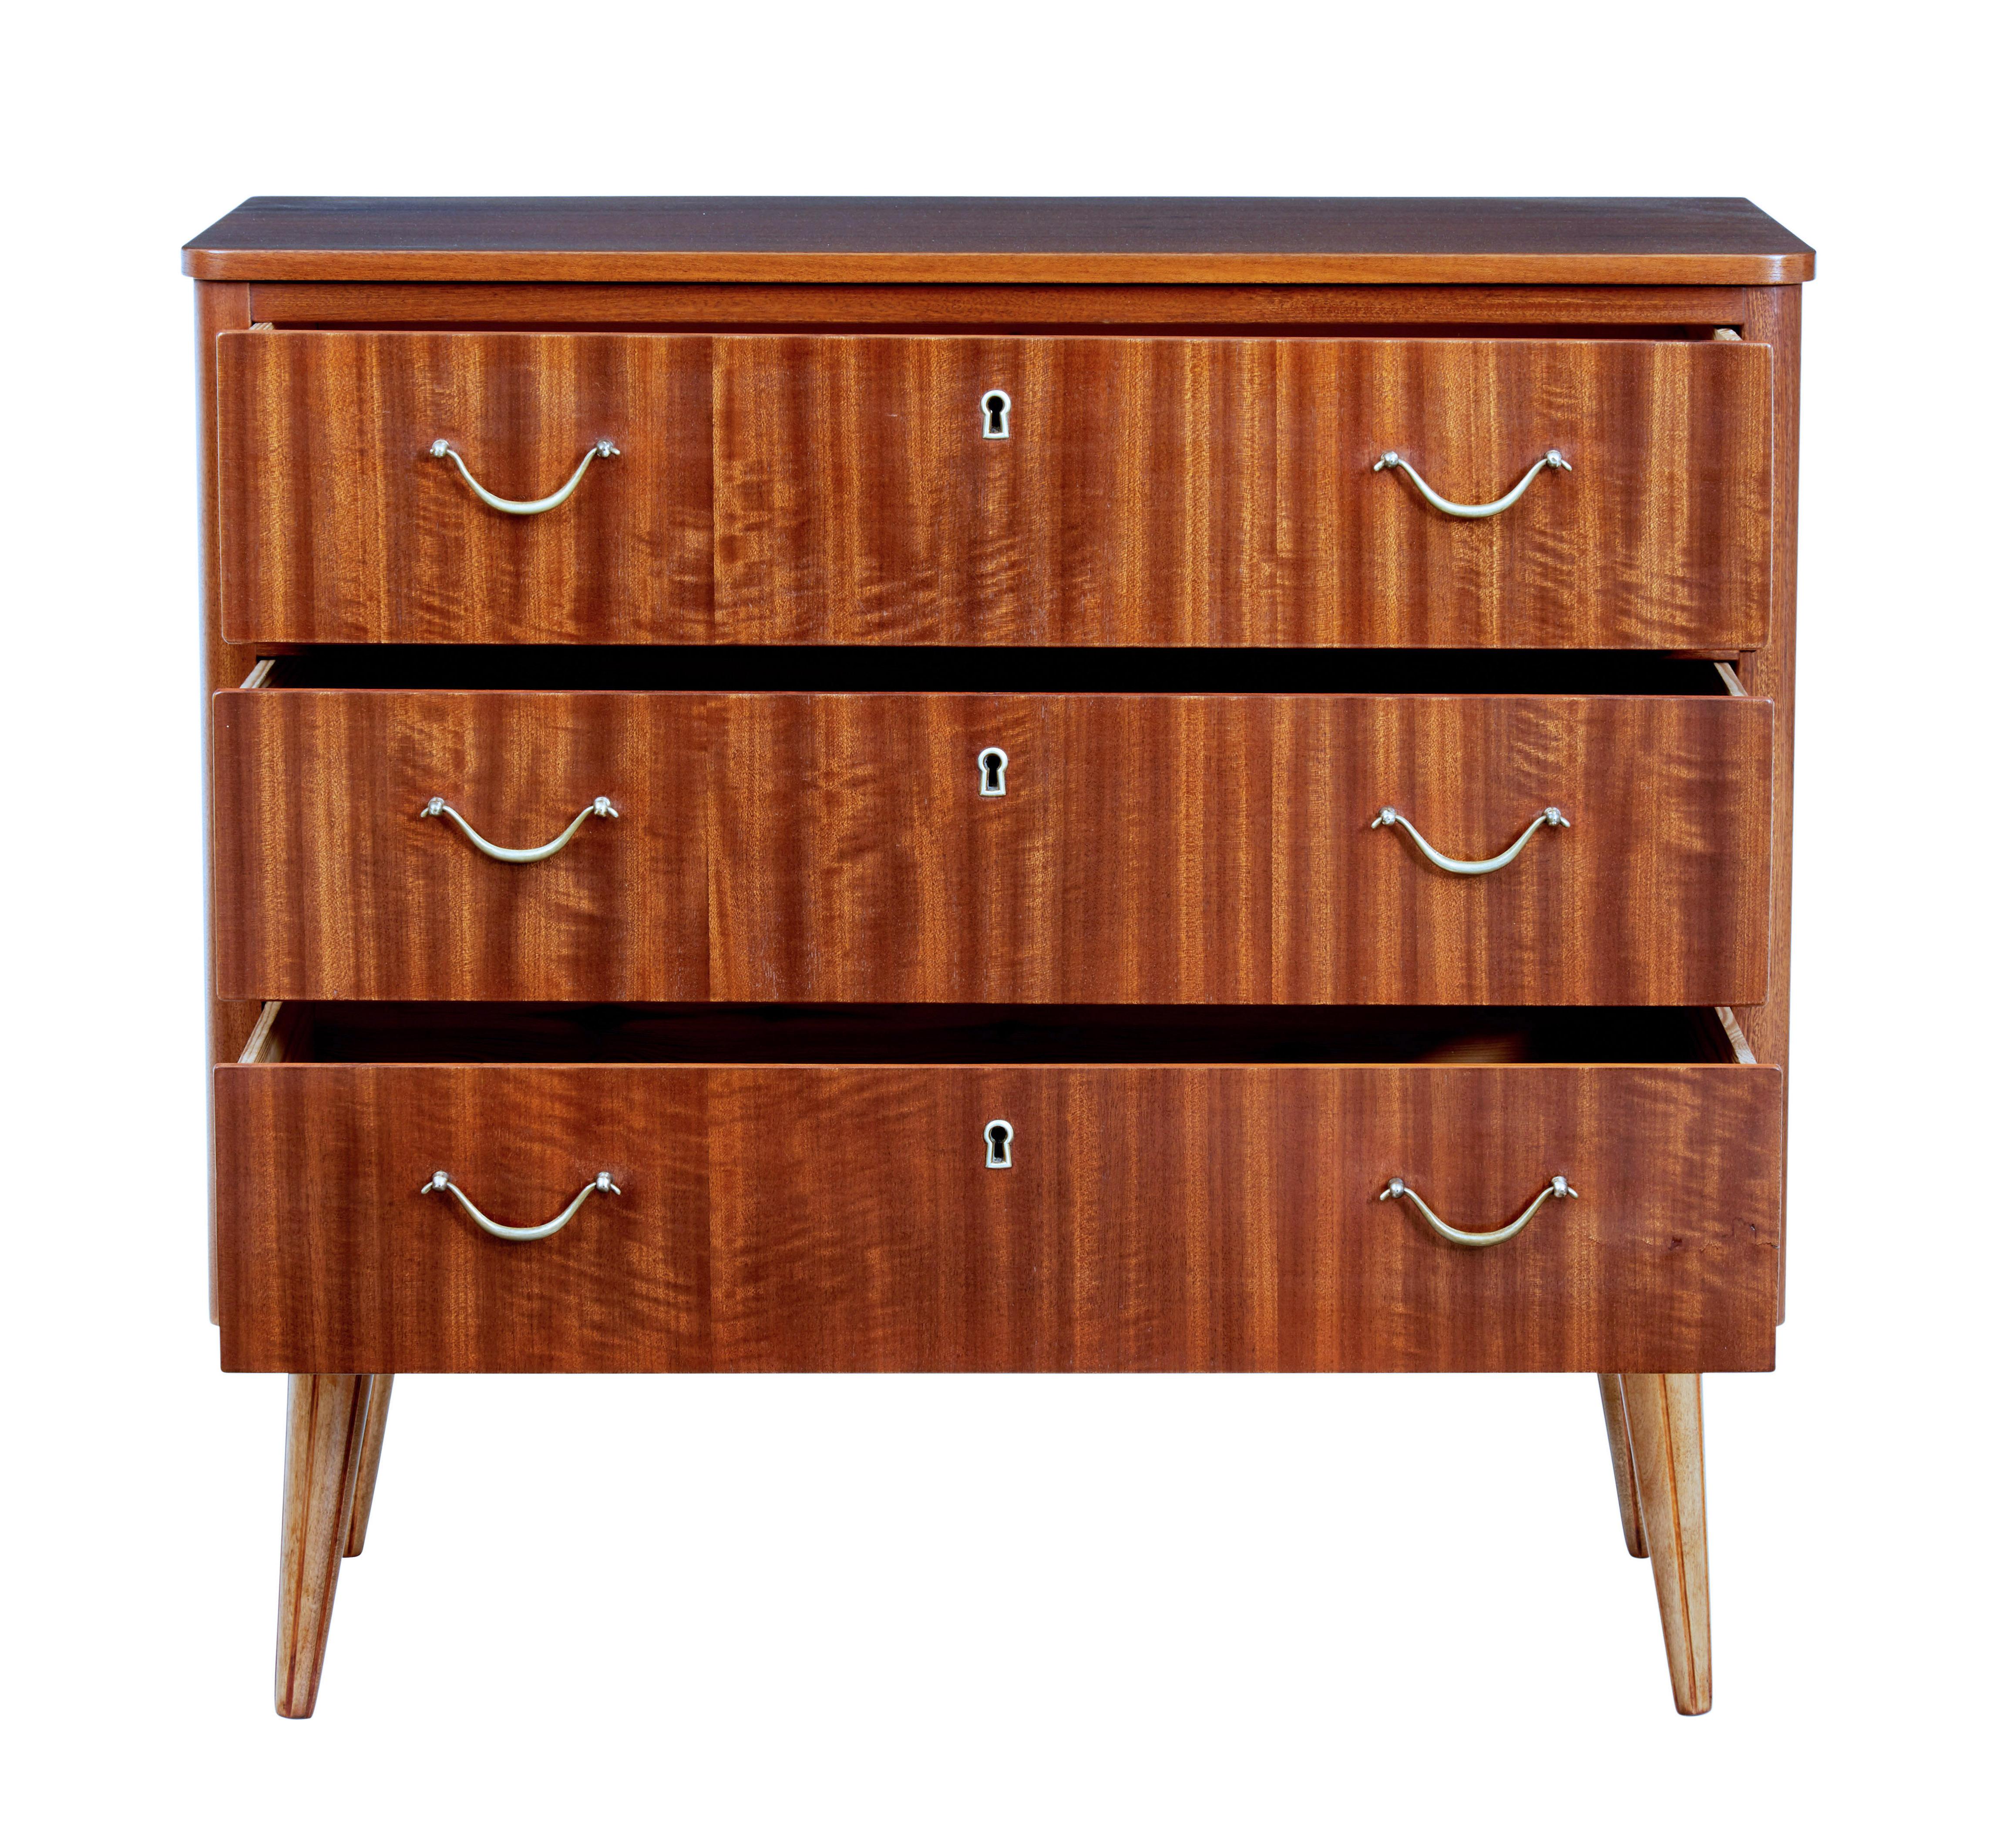 Mid 20th century Danish small teak chest of drawers circa 1960.

3 drawers fitted with brass looped handles.  Rich colour and unusually for teak polished surface.

Standing on tapered legs.

Light staining to top surface.